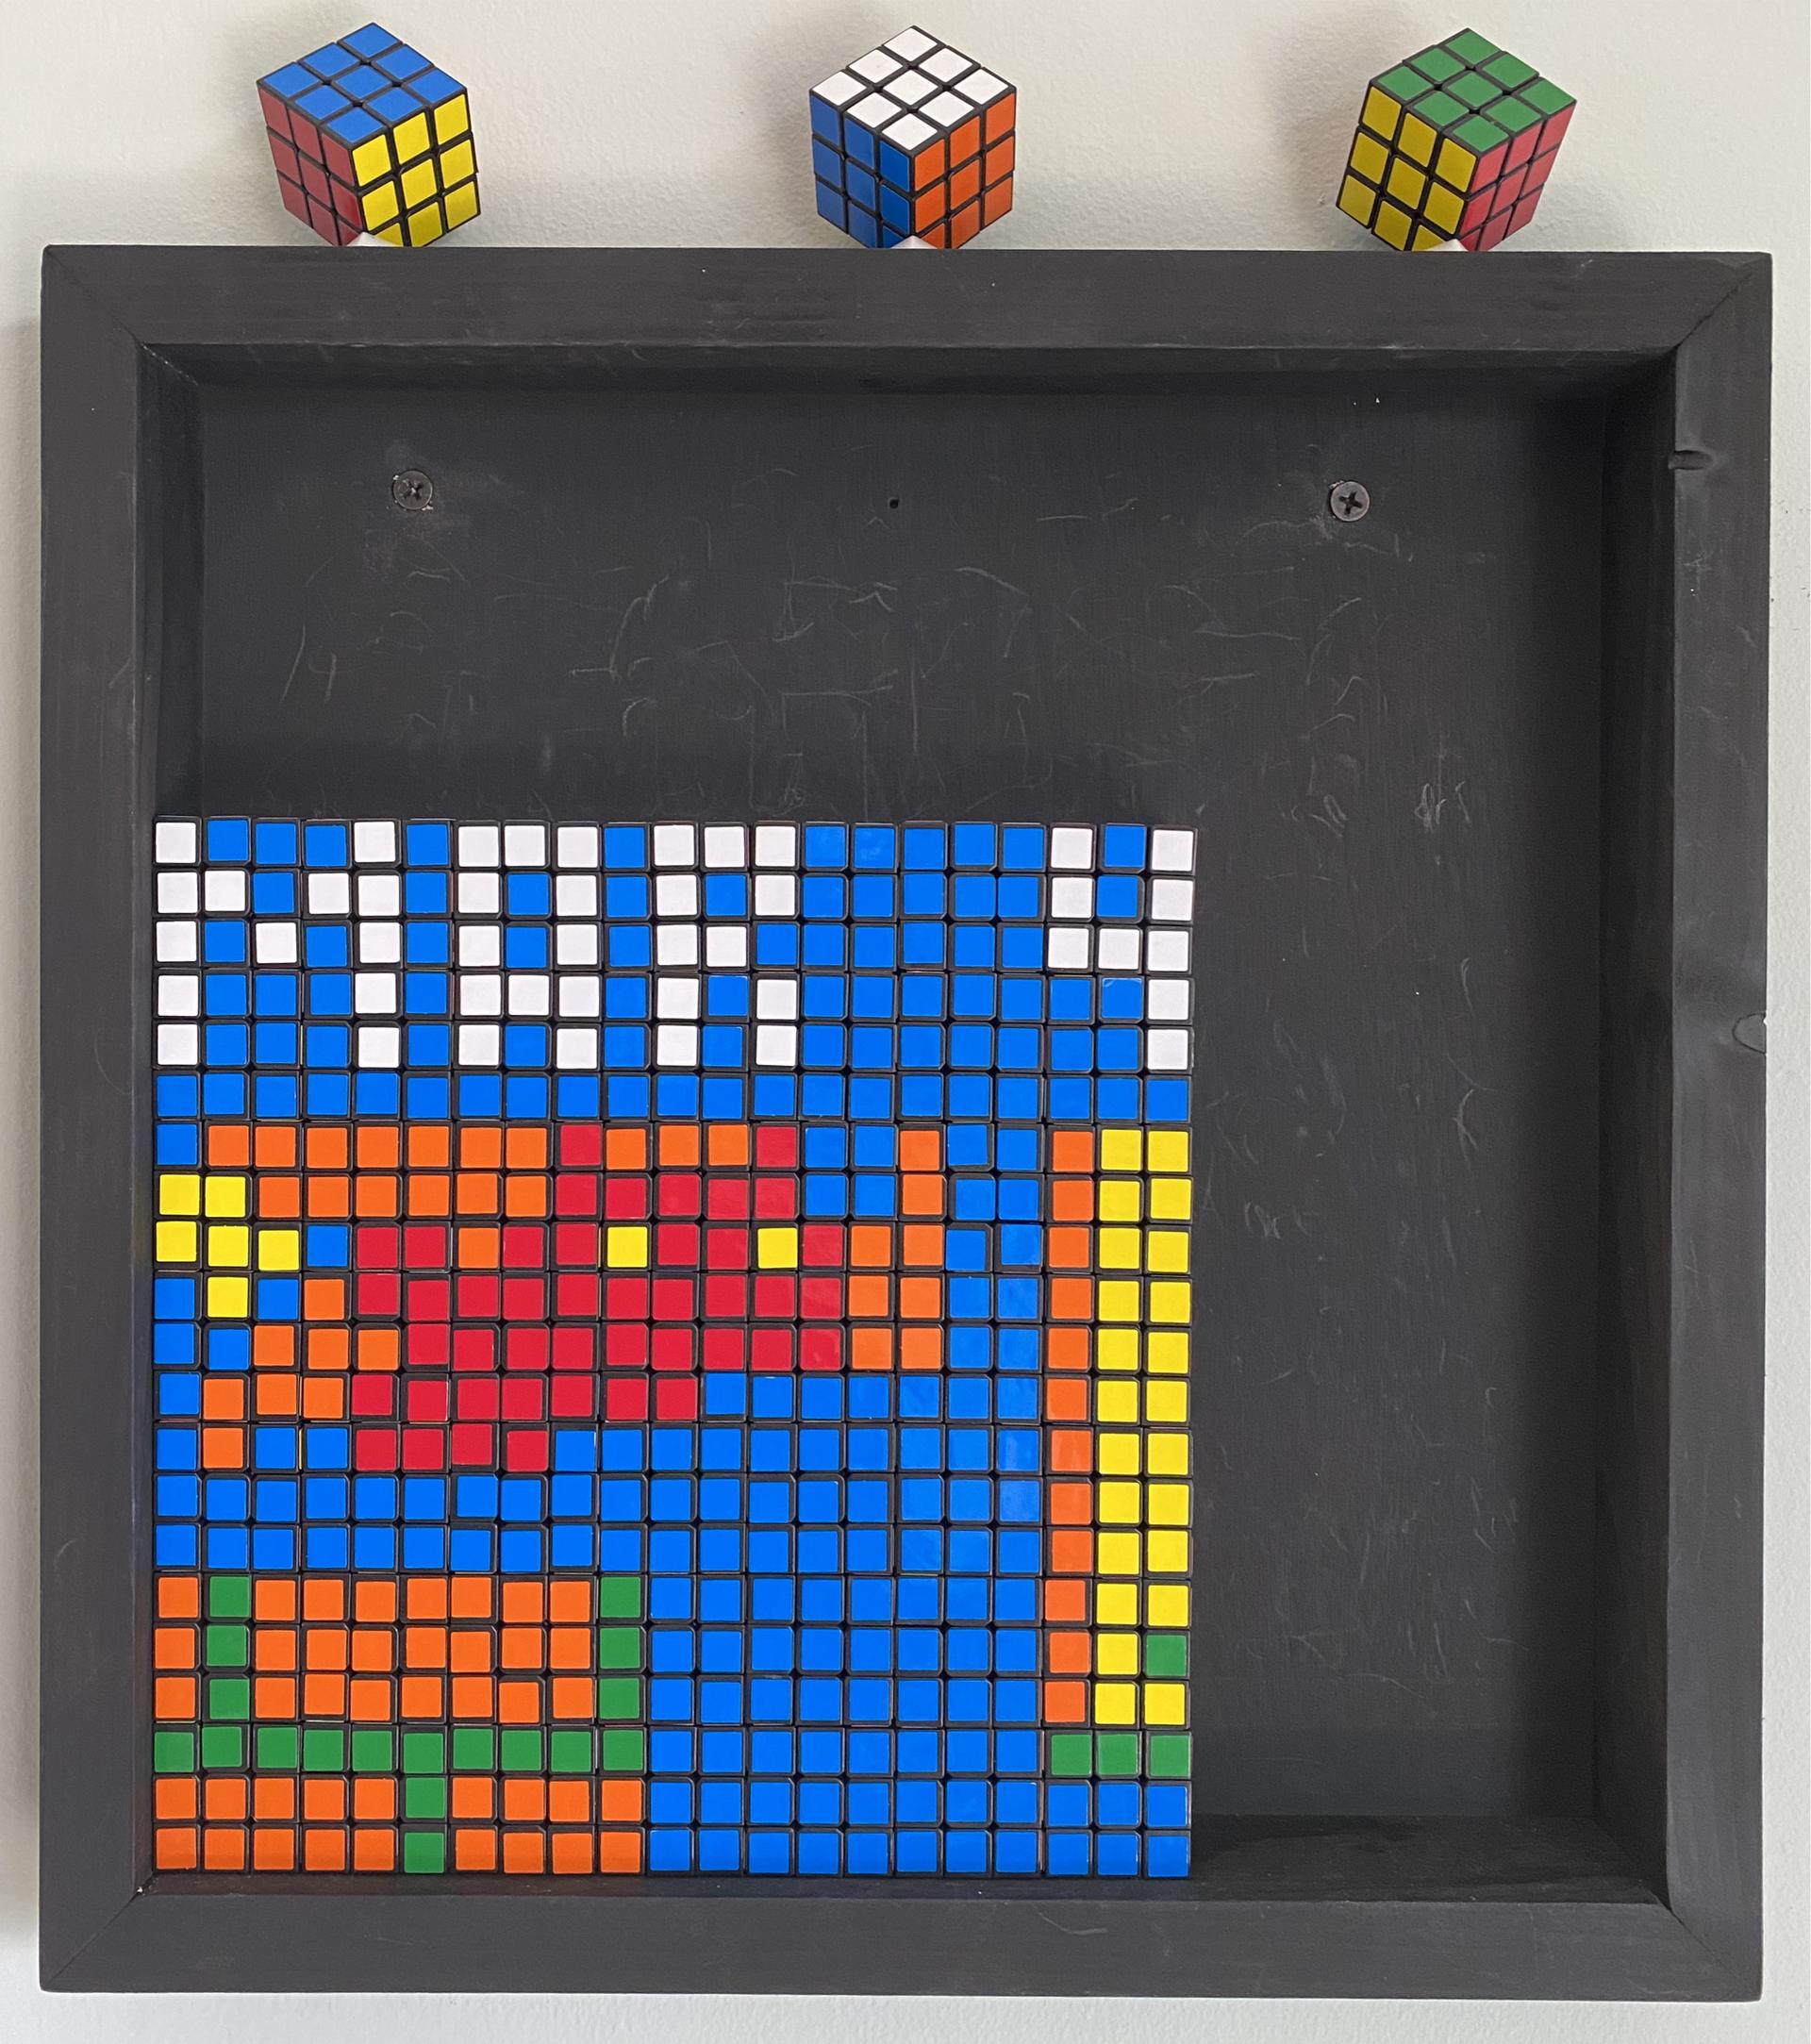 Partially built Rubik's cubes as pixel art of Super Mario jumping up to a question block for Mar 04